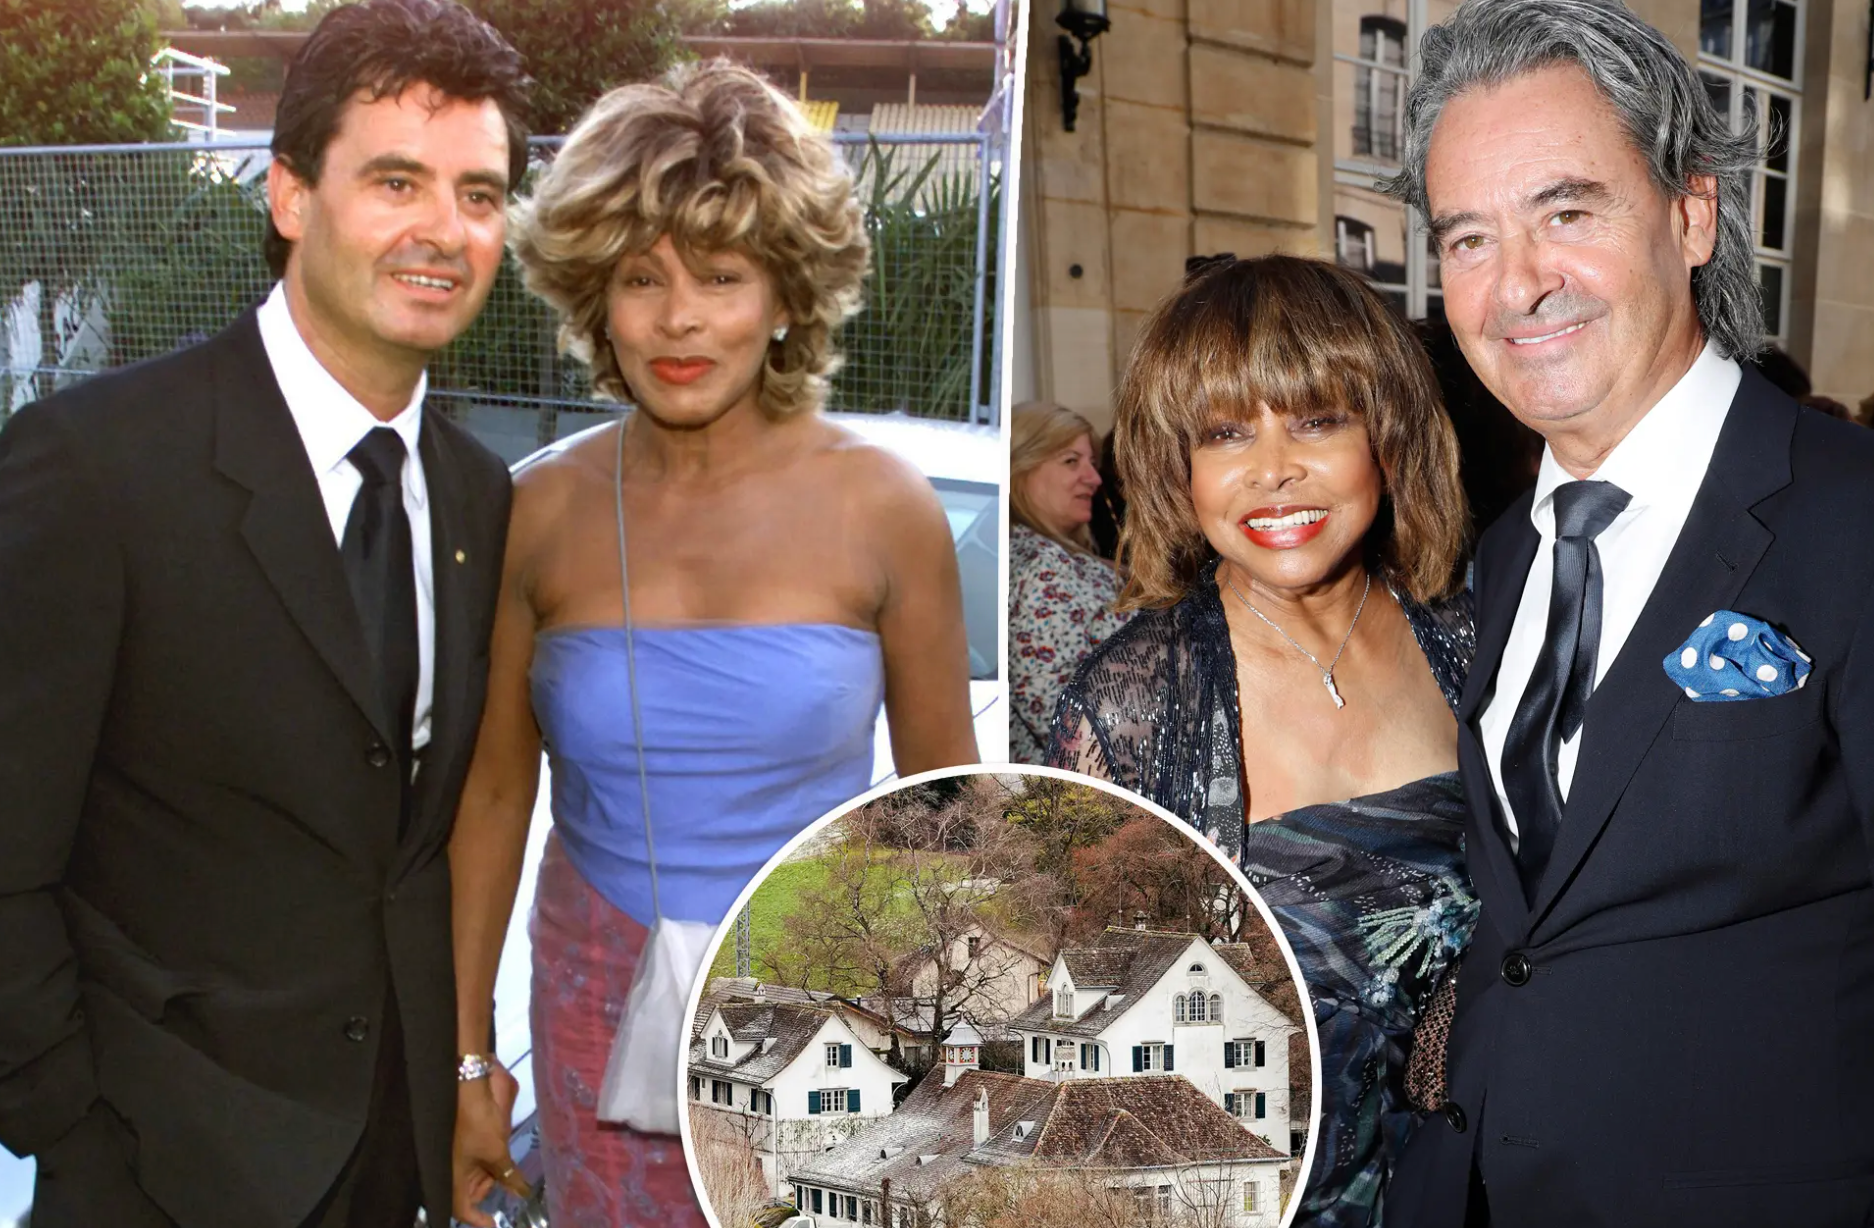 Tina Turner Family - Was She Married?